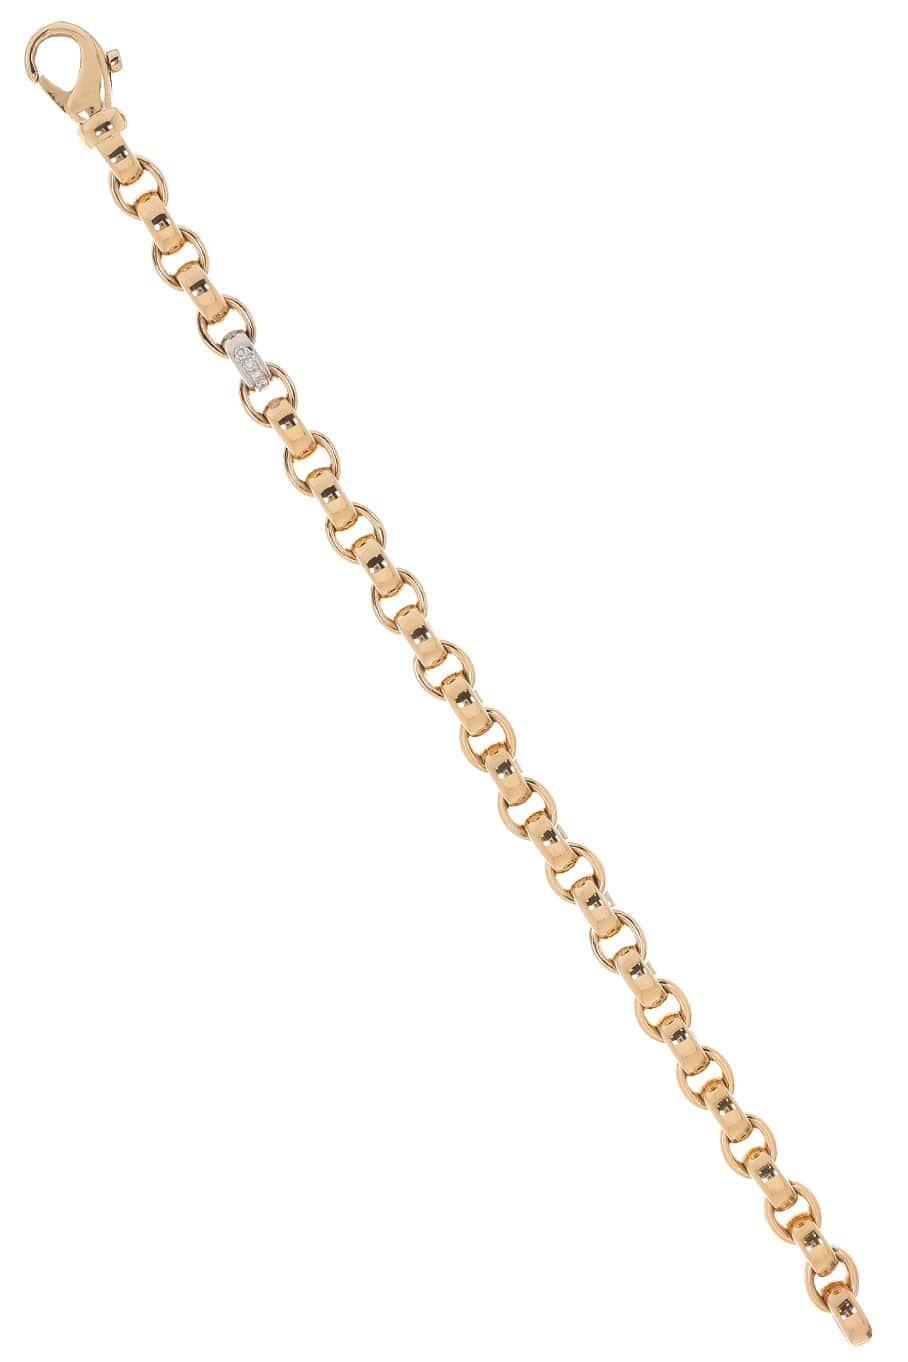 ISABELLE FA-ChaCha Pave Bracelet-YELLOW GOLD